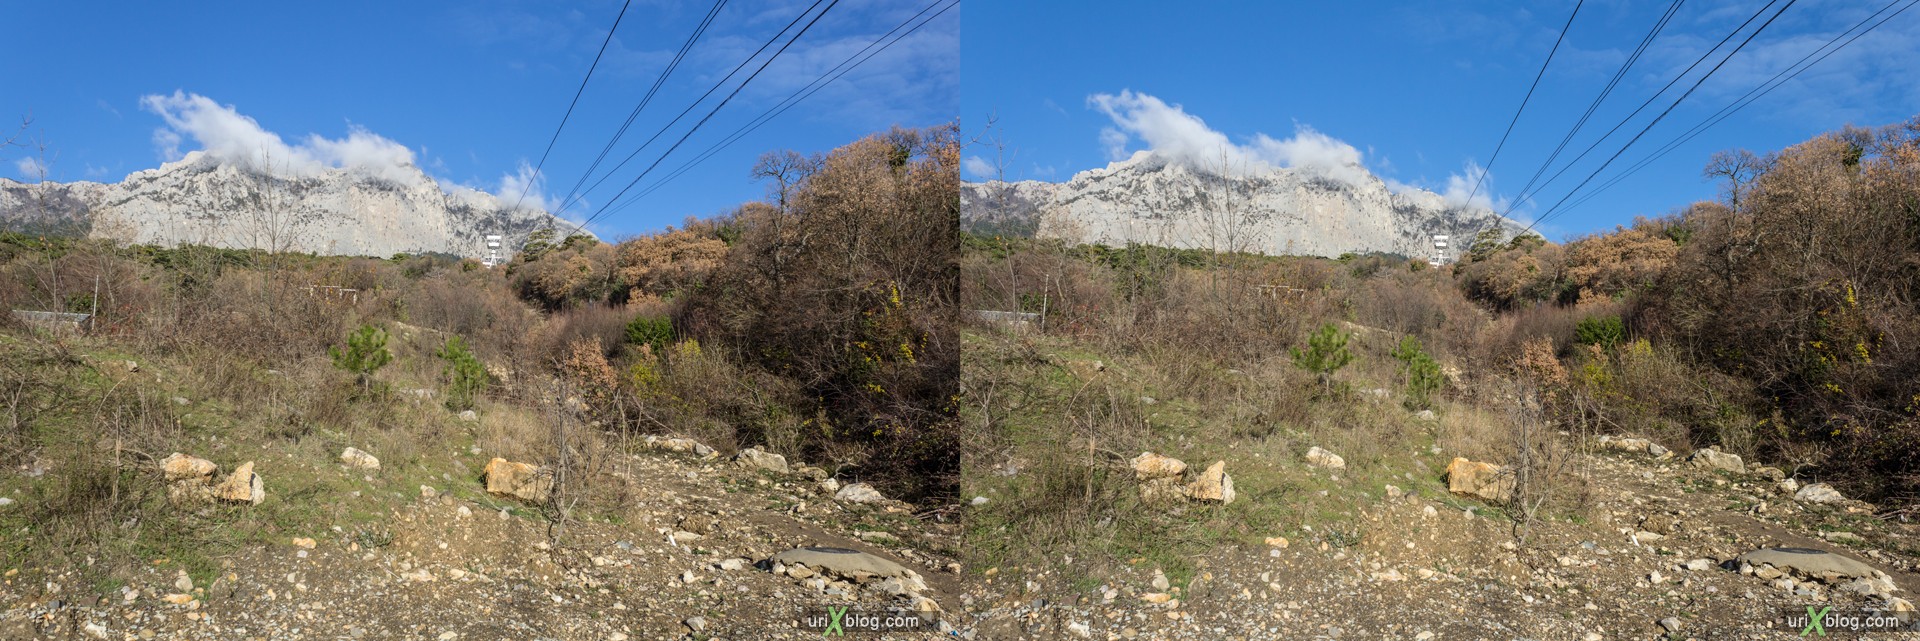 2012, Ai-Petri, mountains, Crimea, Russia, Ukraine, cableway, winter, 3D, stereo pair, cross-eyed, crossview, cross view stereo pair, stereoscopic